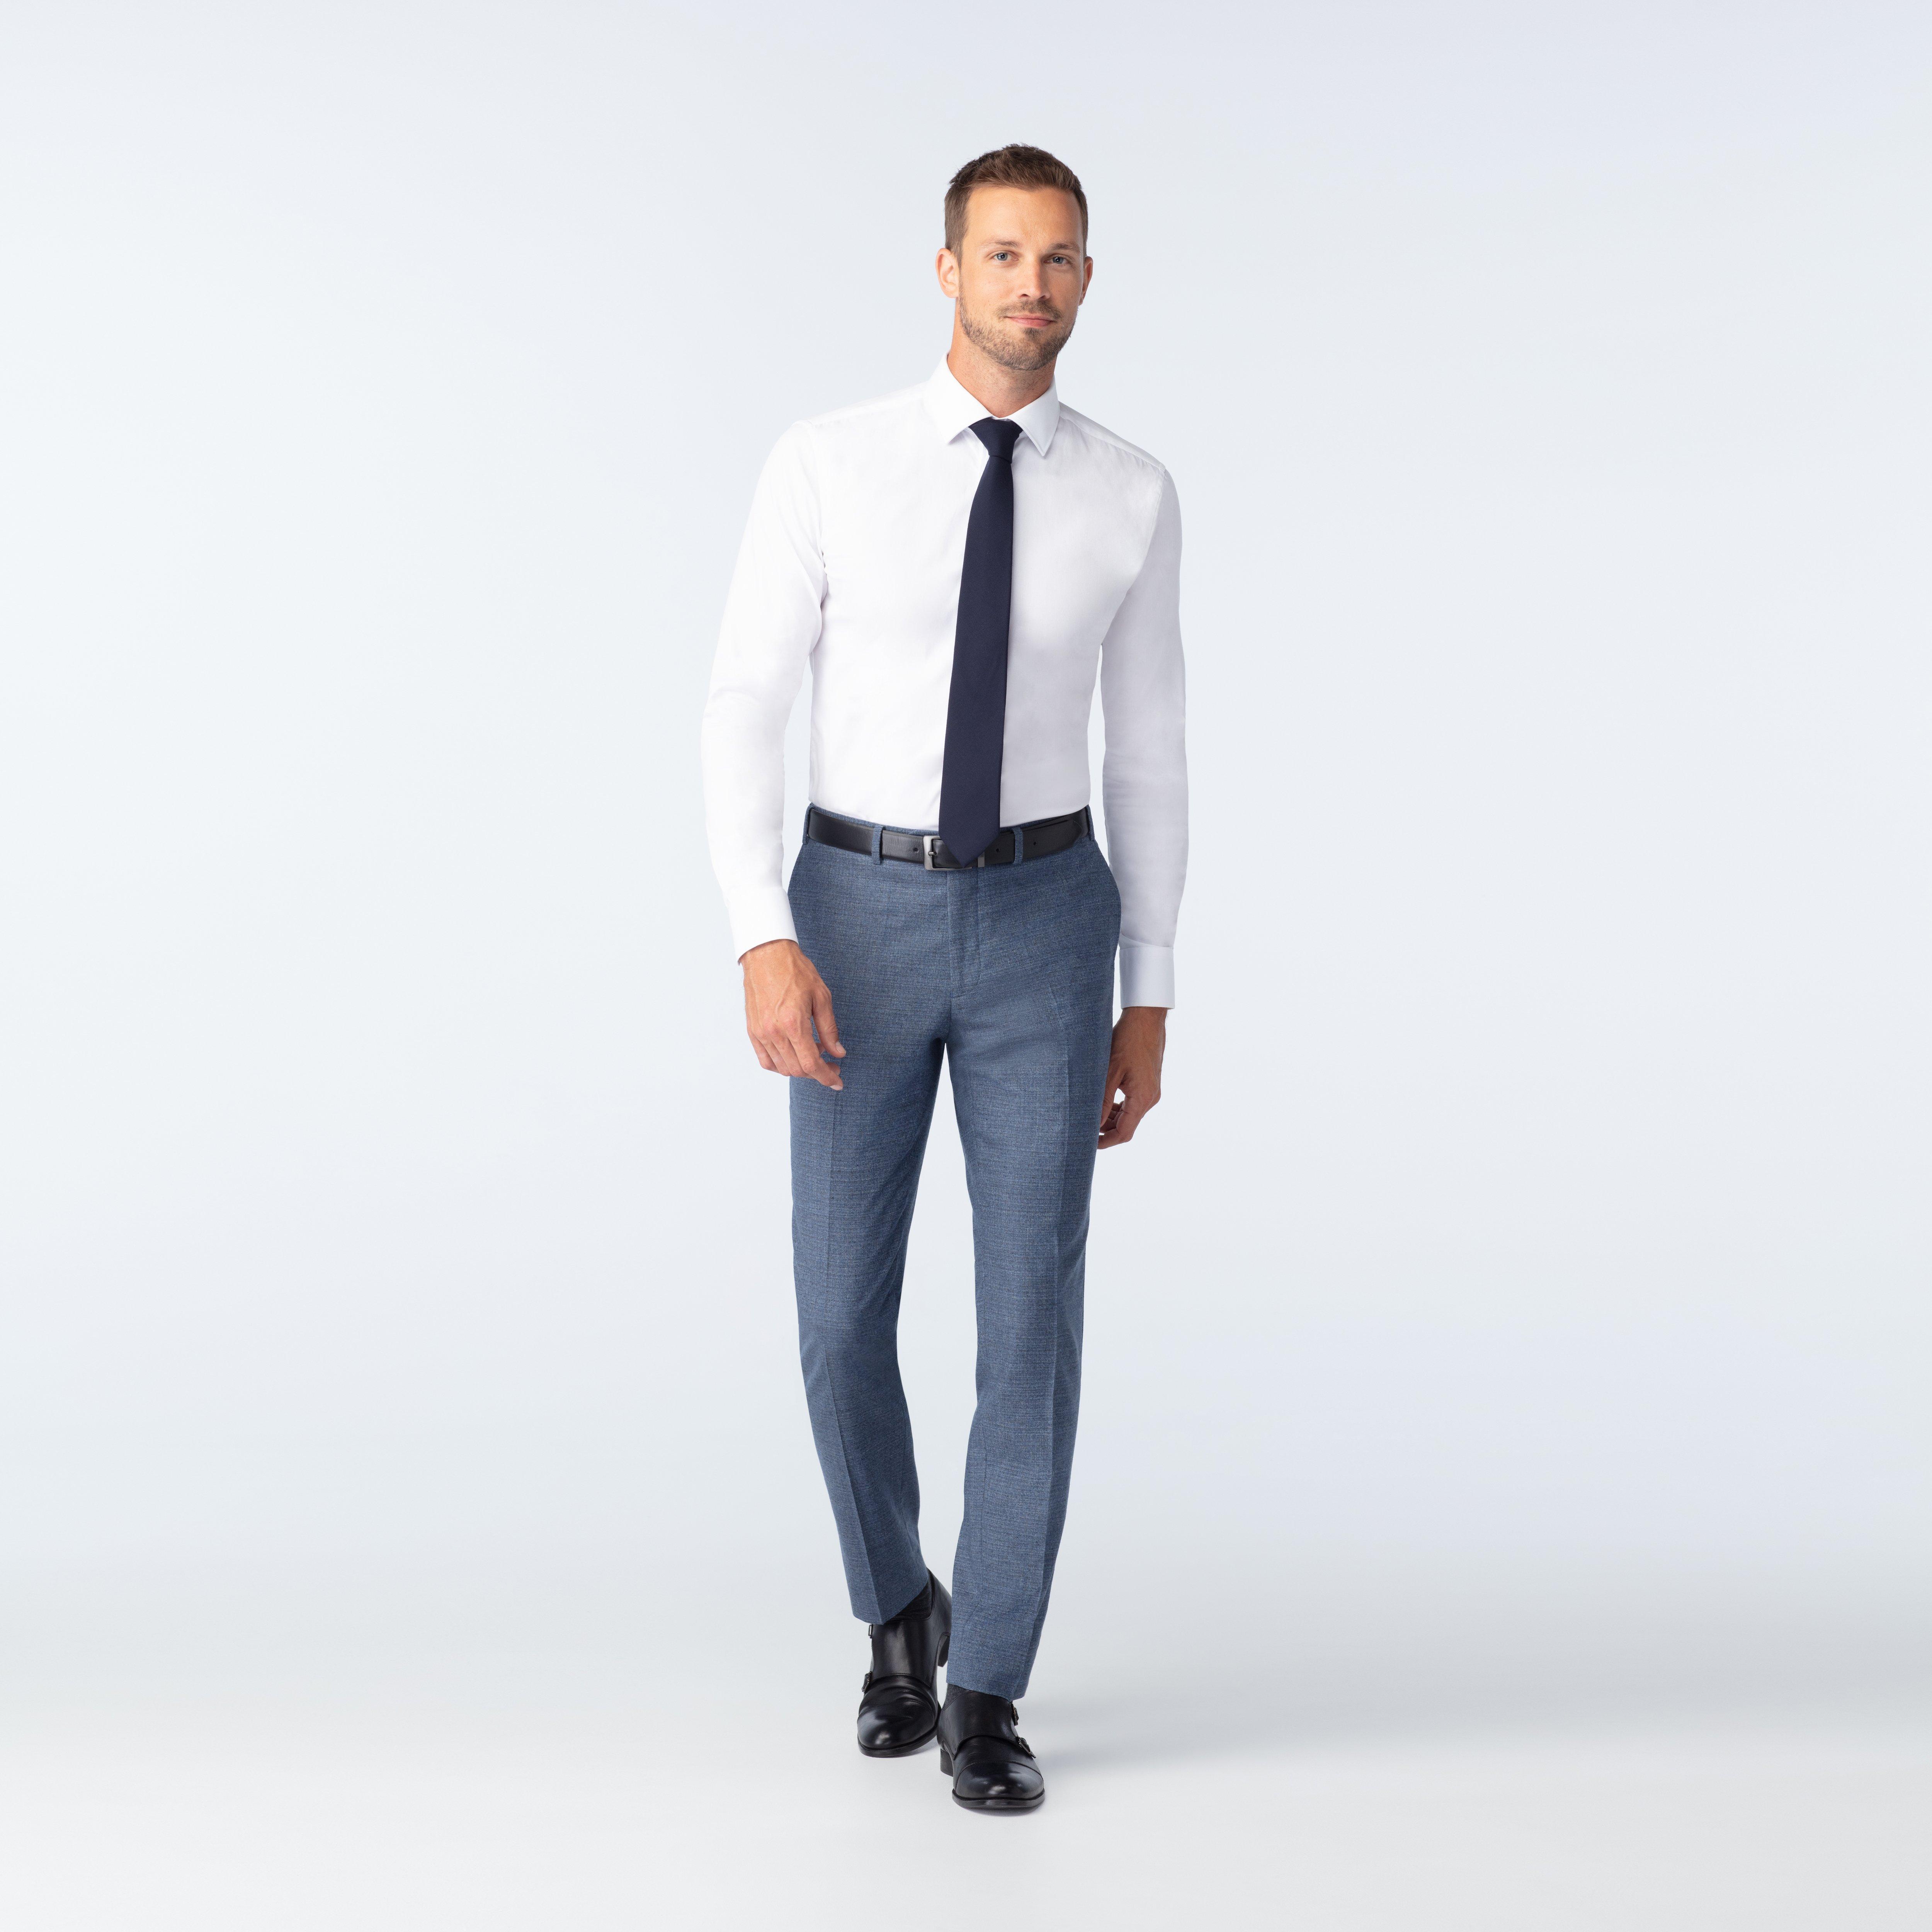 Custom Suits Made For You - Monza Royal Flannel Stone Blue Suit | INDOCHINO